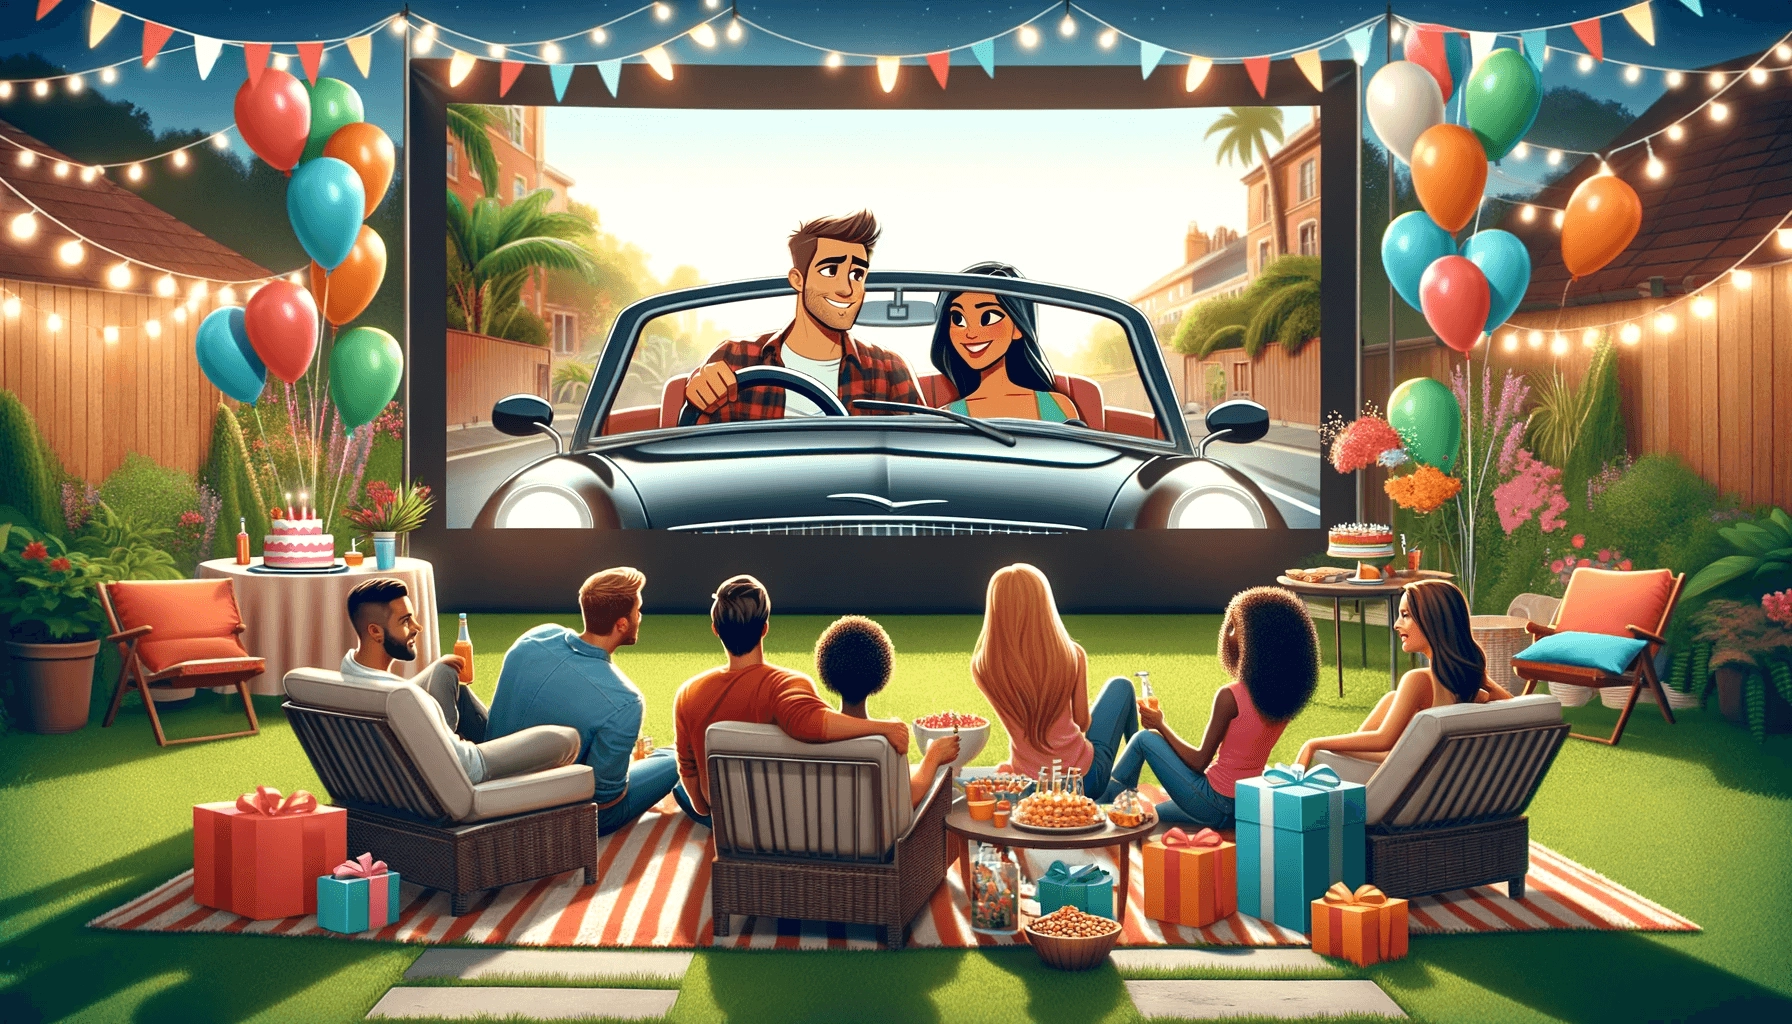 Graphic of a backyard movie birthday party